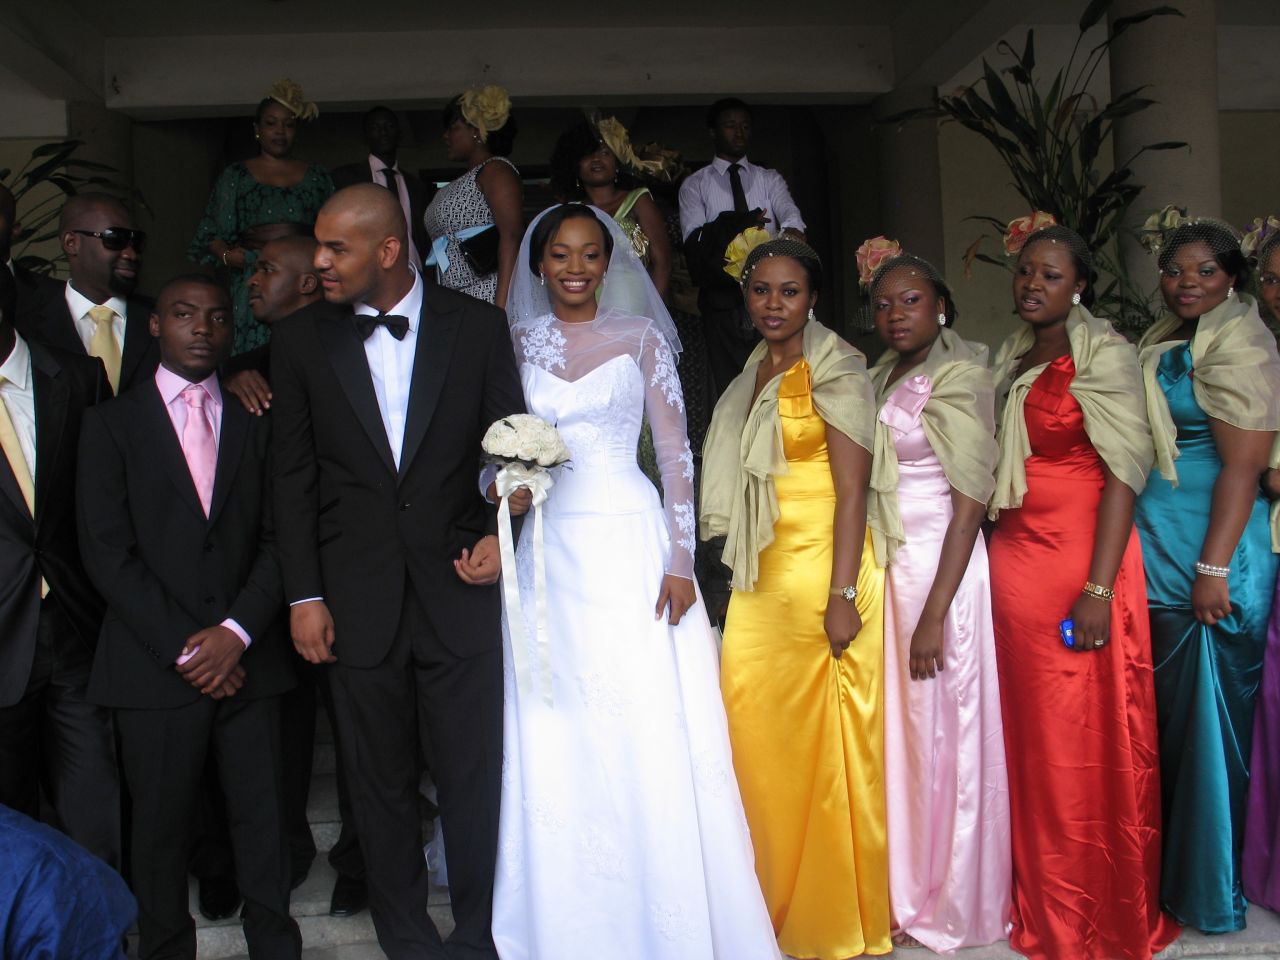 A bride and the bridal party at a Nigerian wedding. Nigerian weddings feature two ceremonies: a traditional ceremony and a "white wedding."